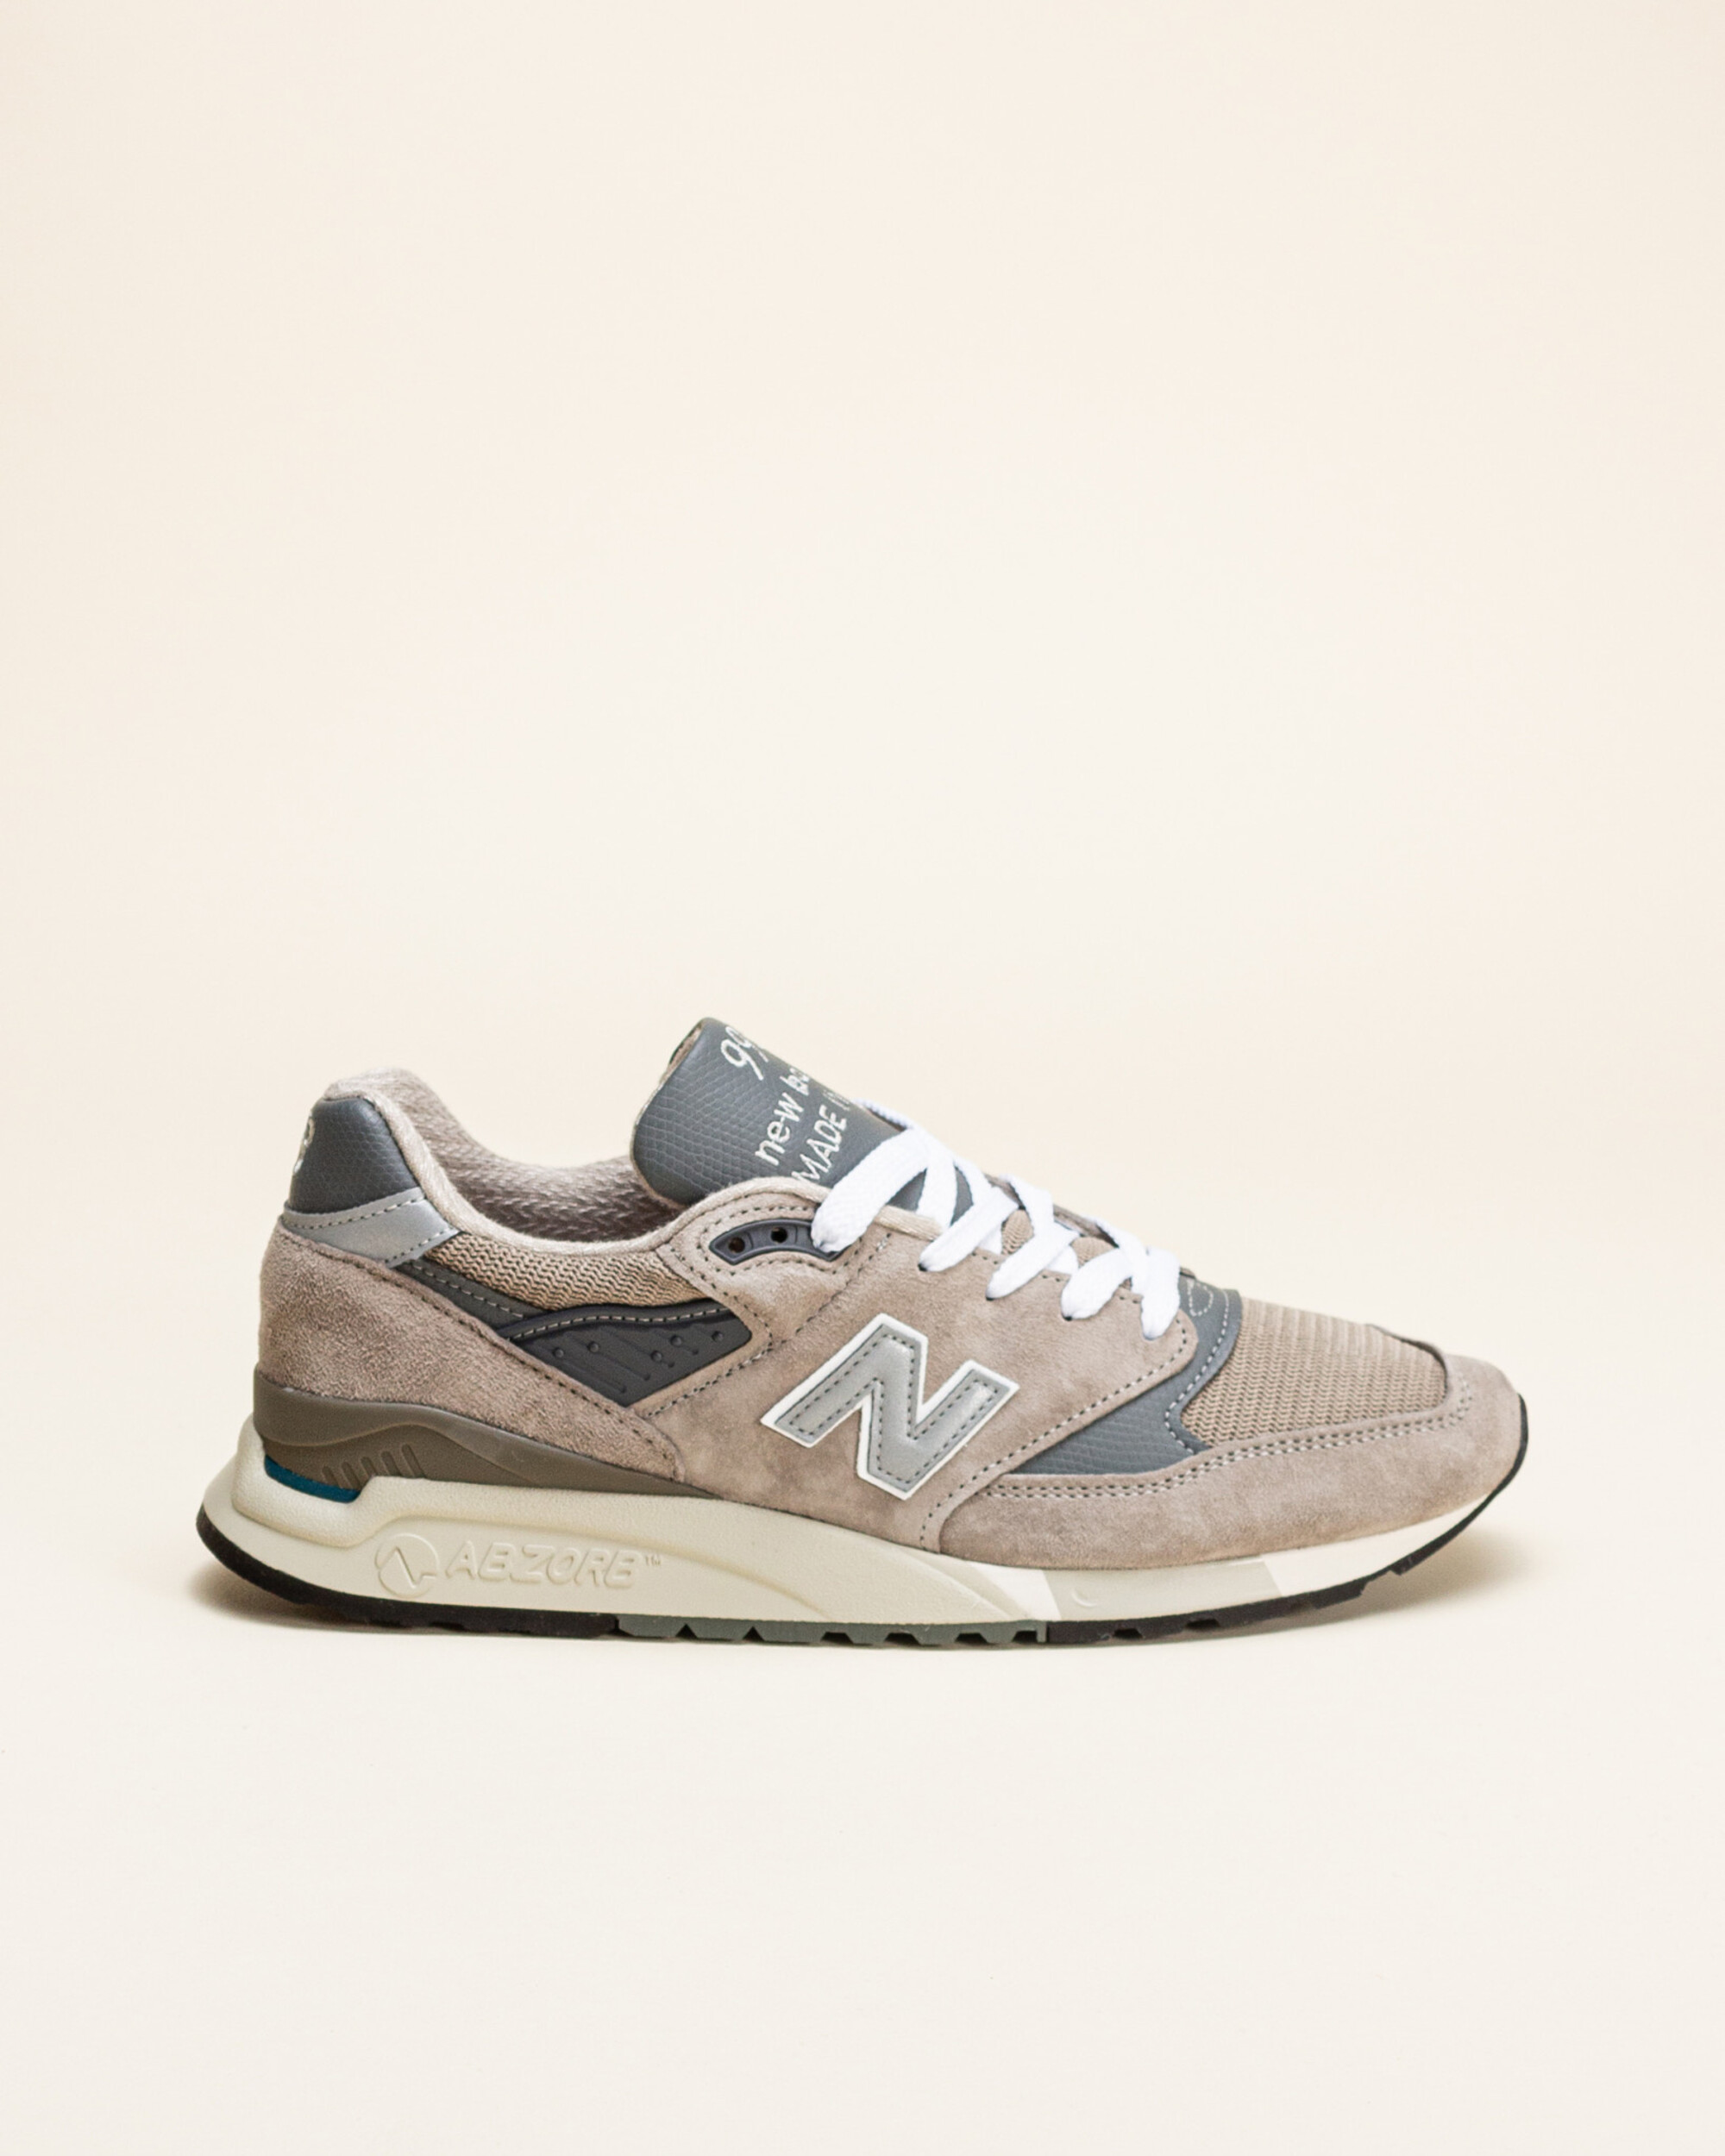 New Balance Made in USA 998 Core - Grey/Silver